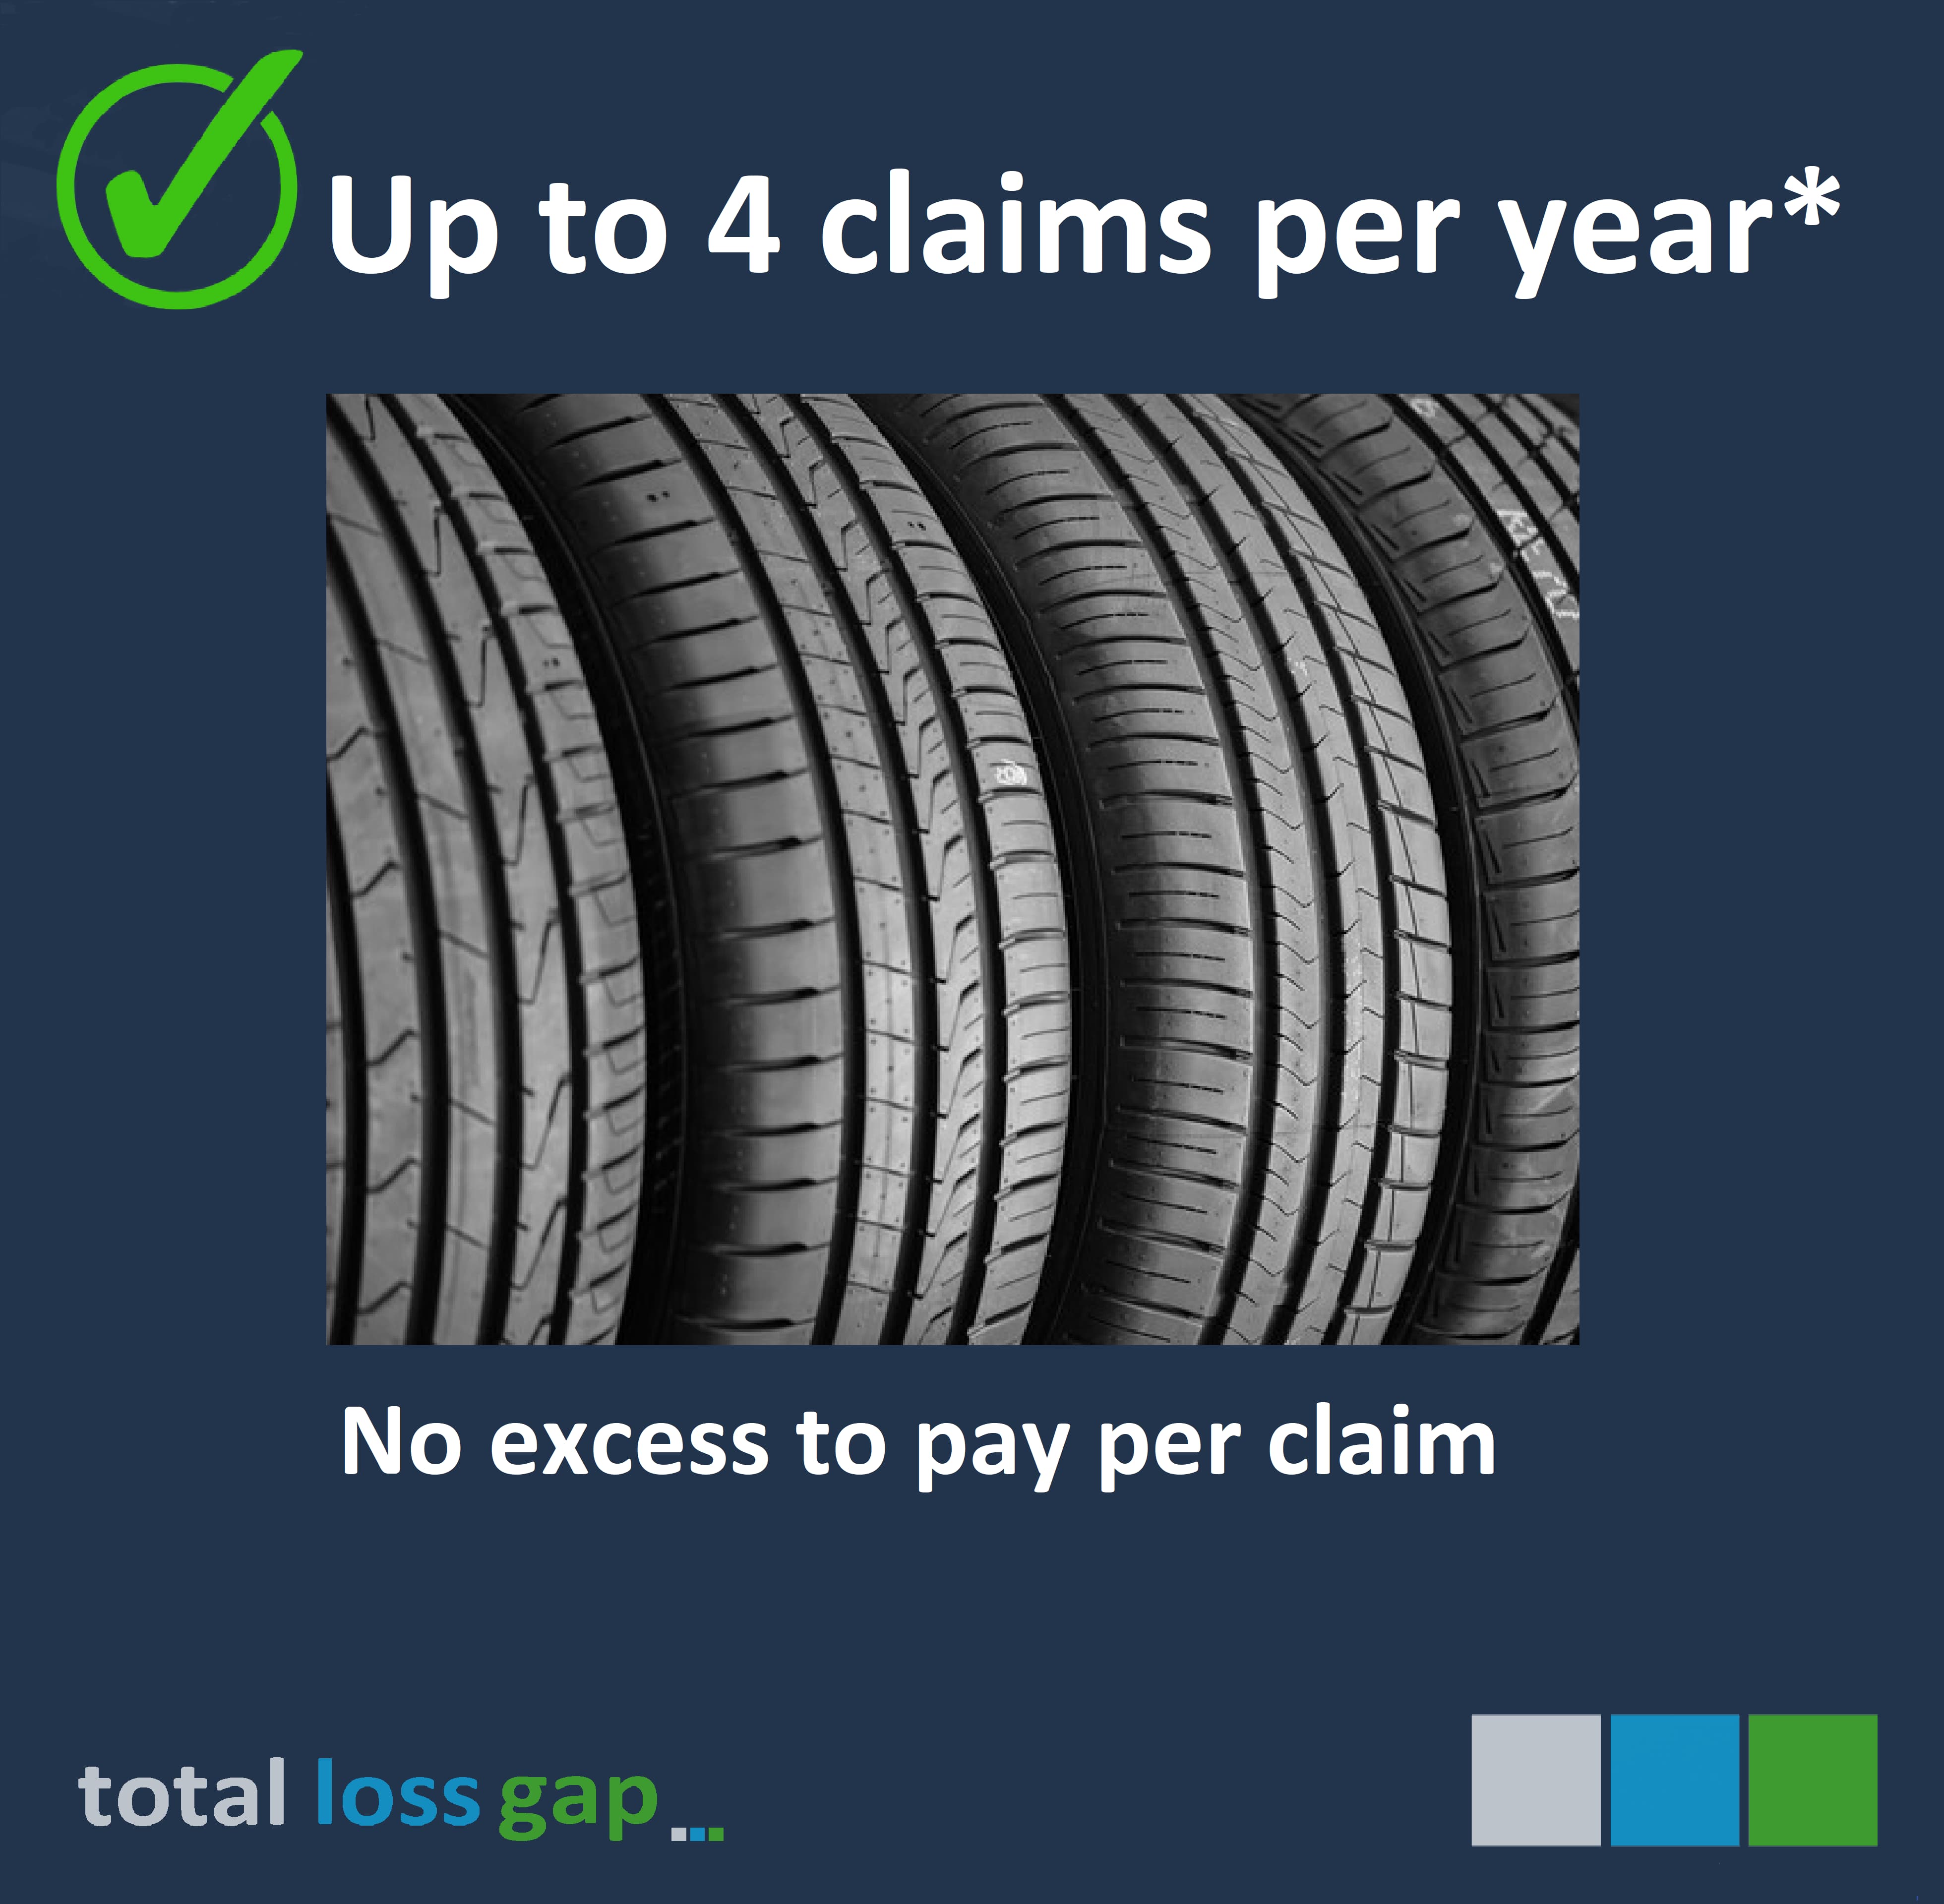 There is no excess to pay when you make a claim